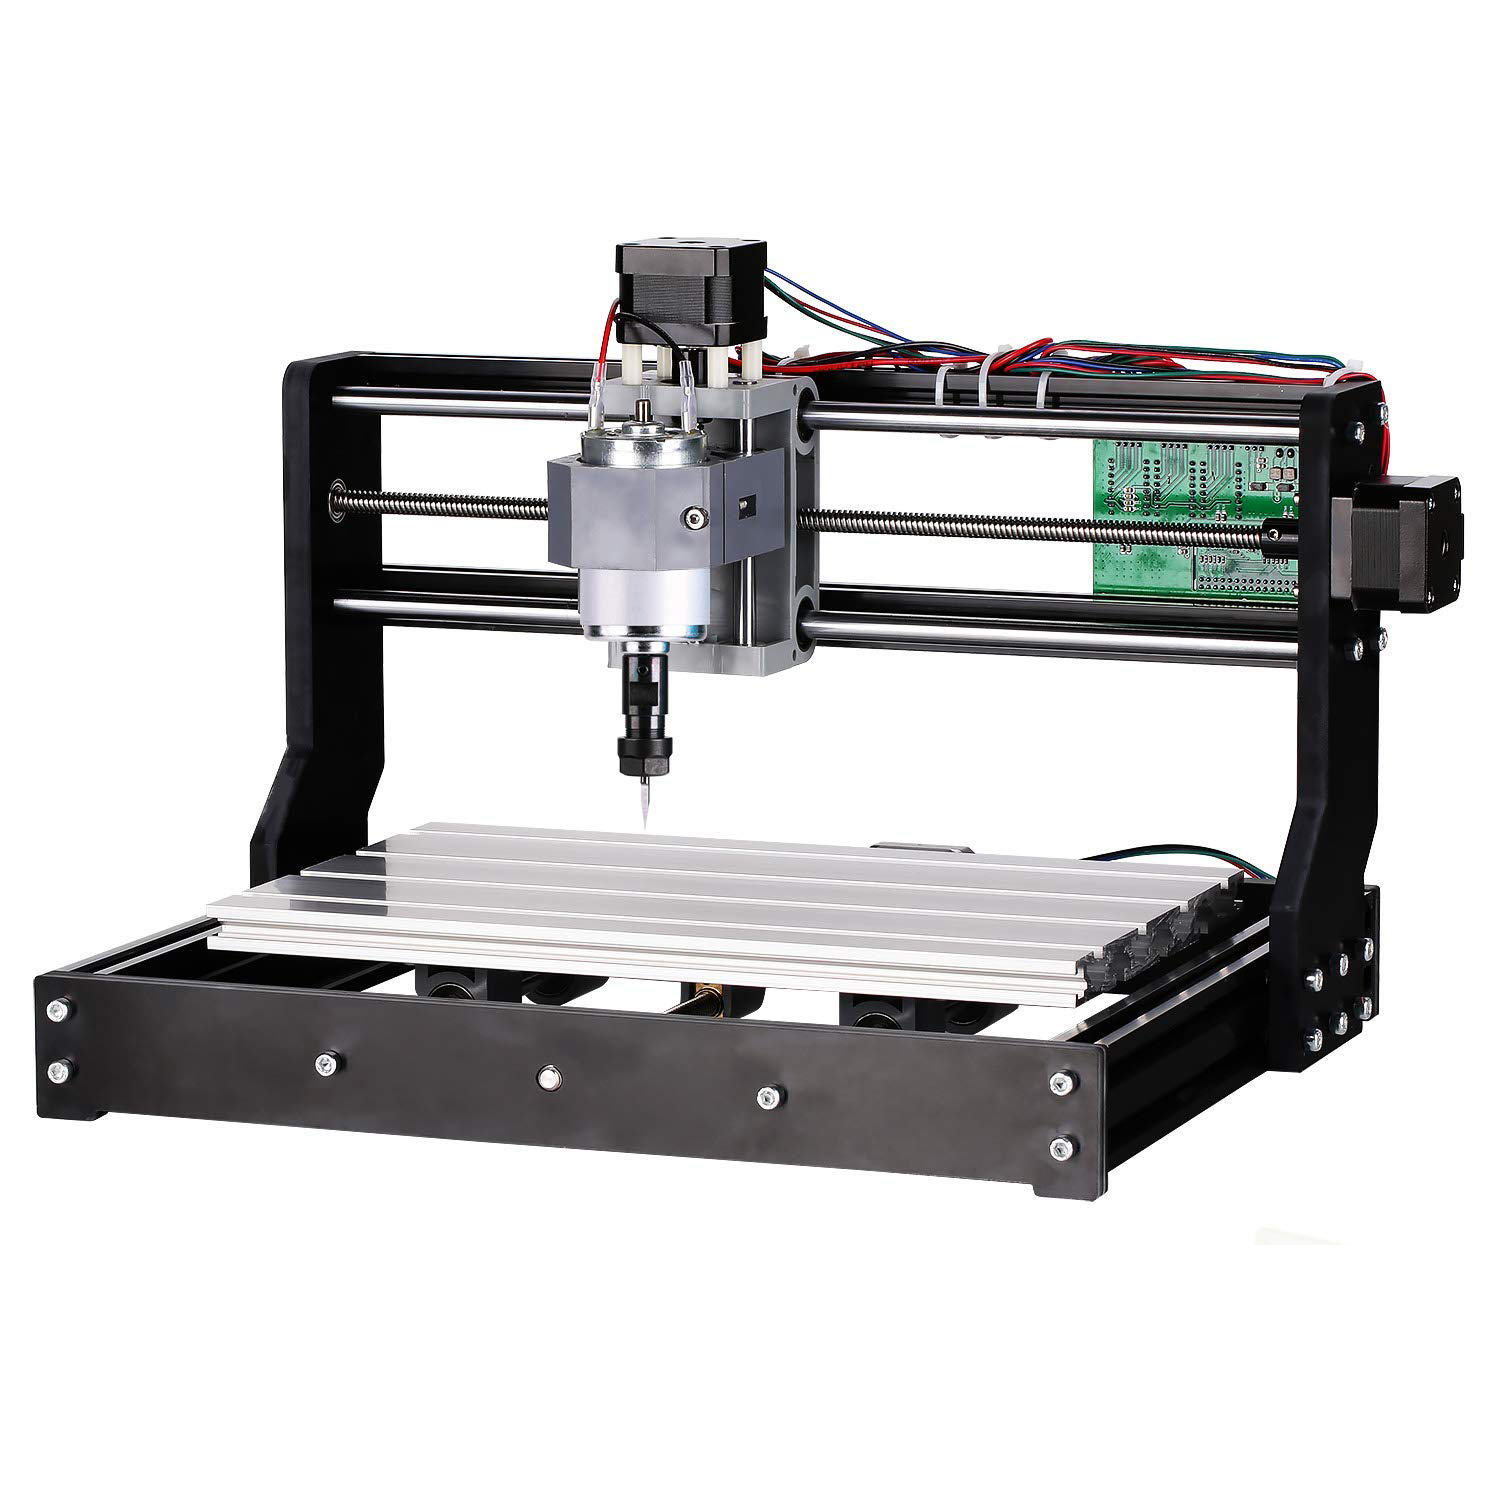 Fanrsquoensheng-3018-Pro-3-Axis-Mini-DIY-CNC-Router-Adjustable-Speed-Spindle-Motor-Wood-Engraving-Ma-1463876-10